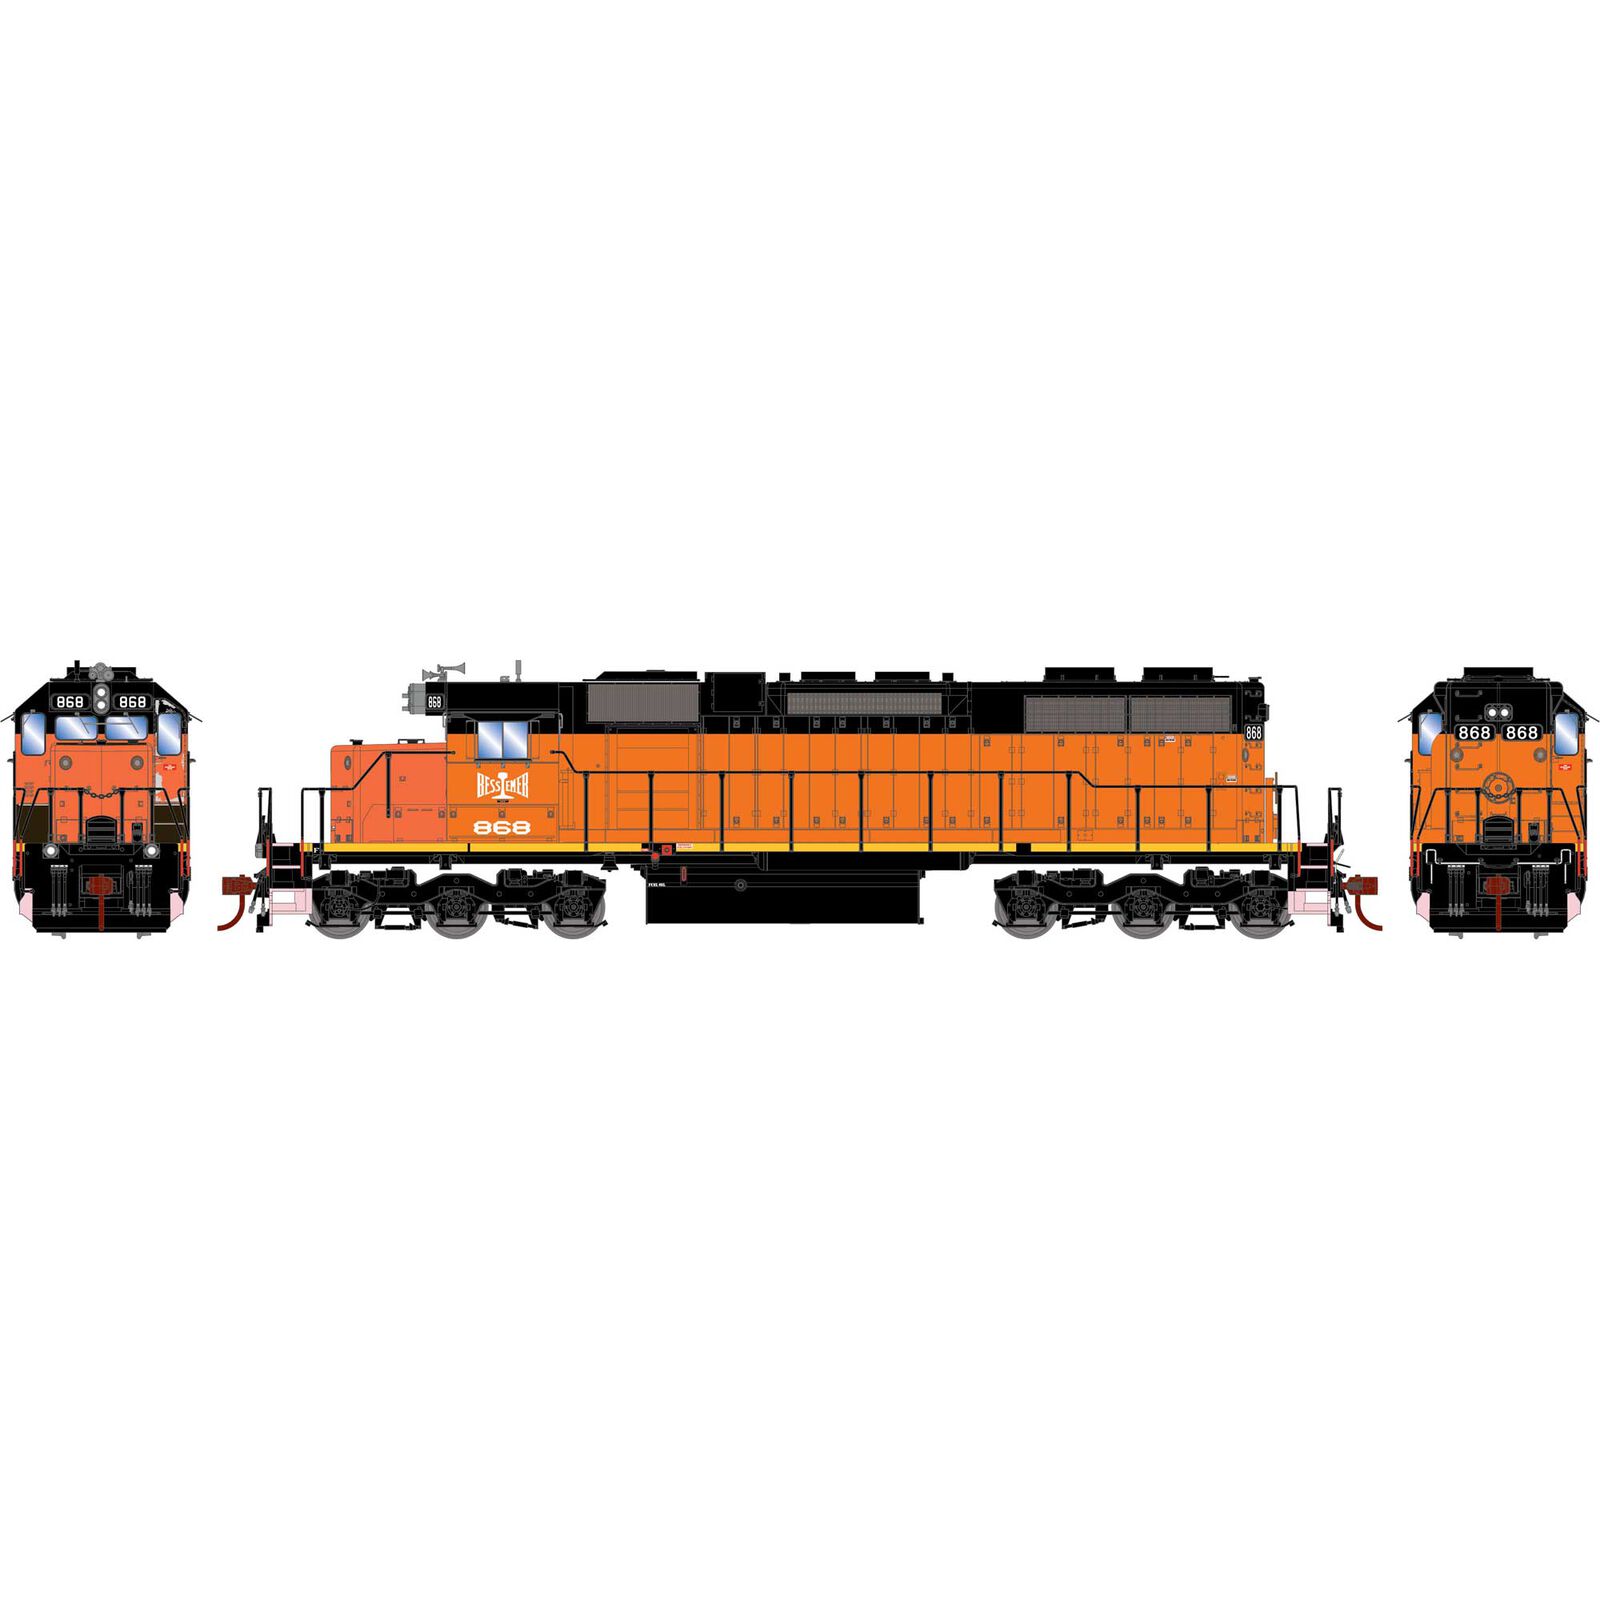 HO RTR SD38 with DCC & Sound, B&LE #868